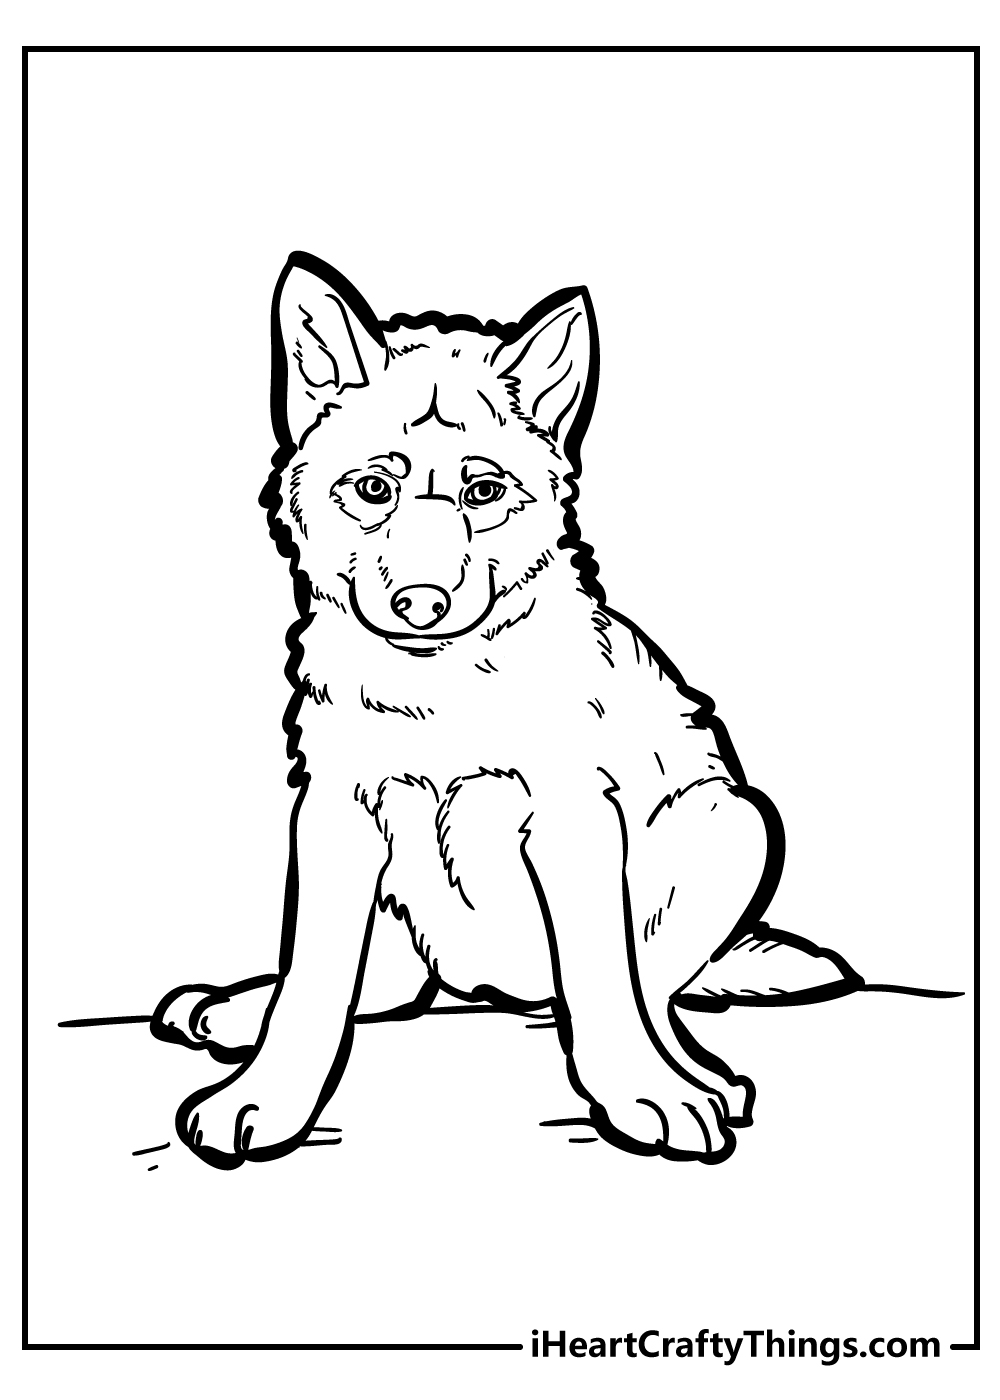 25 Wolf Coloring Pages - All New And Updated (2021)